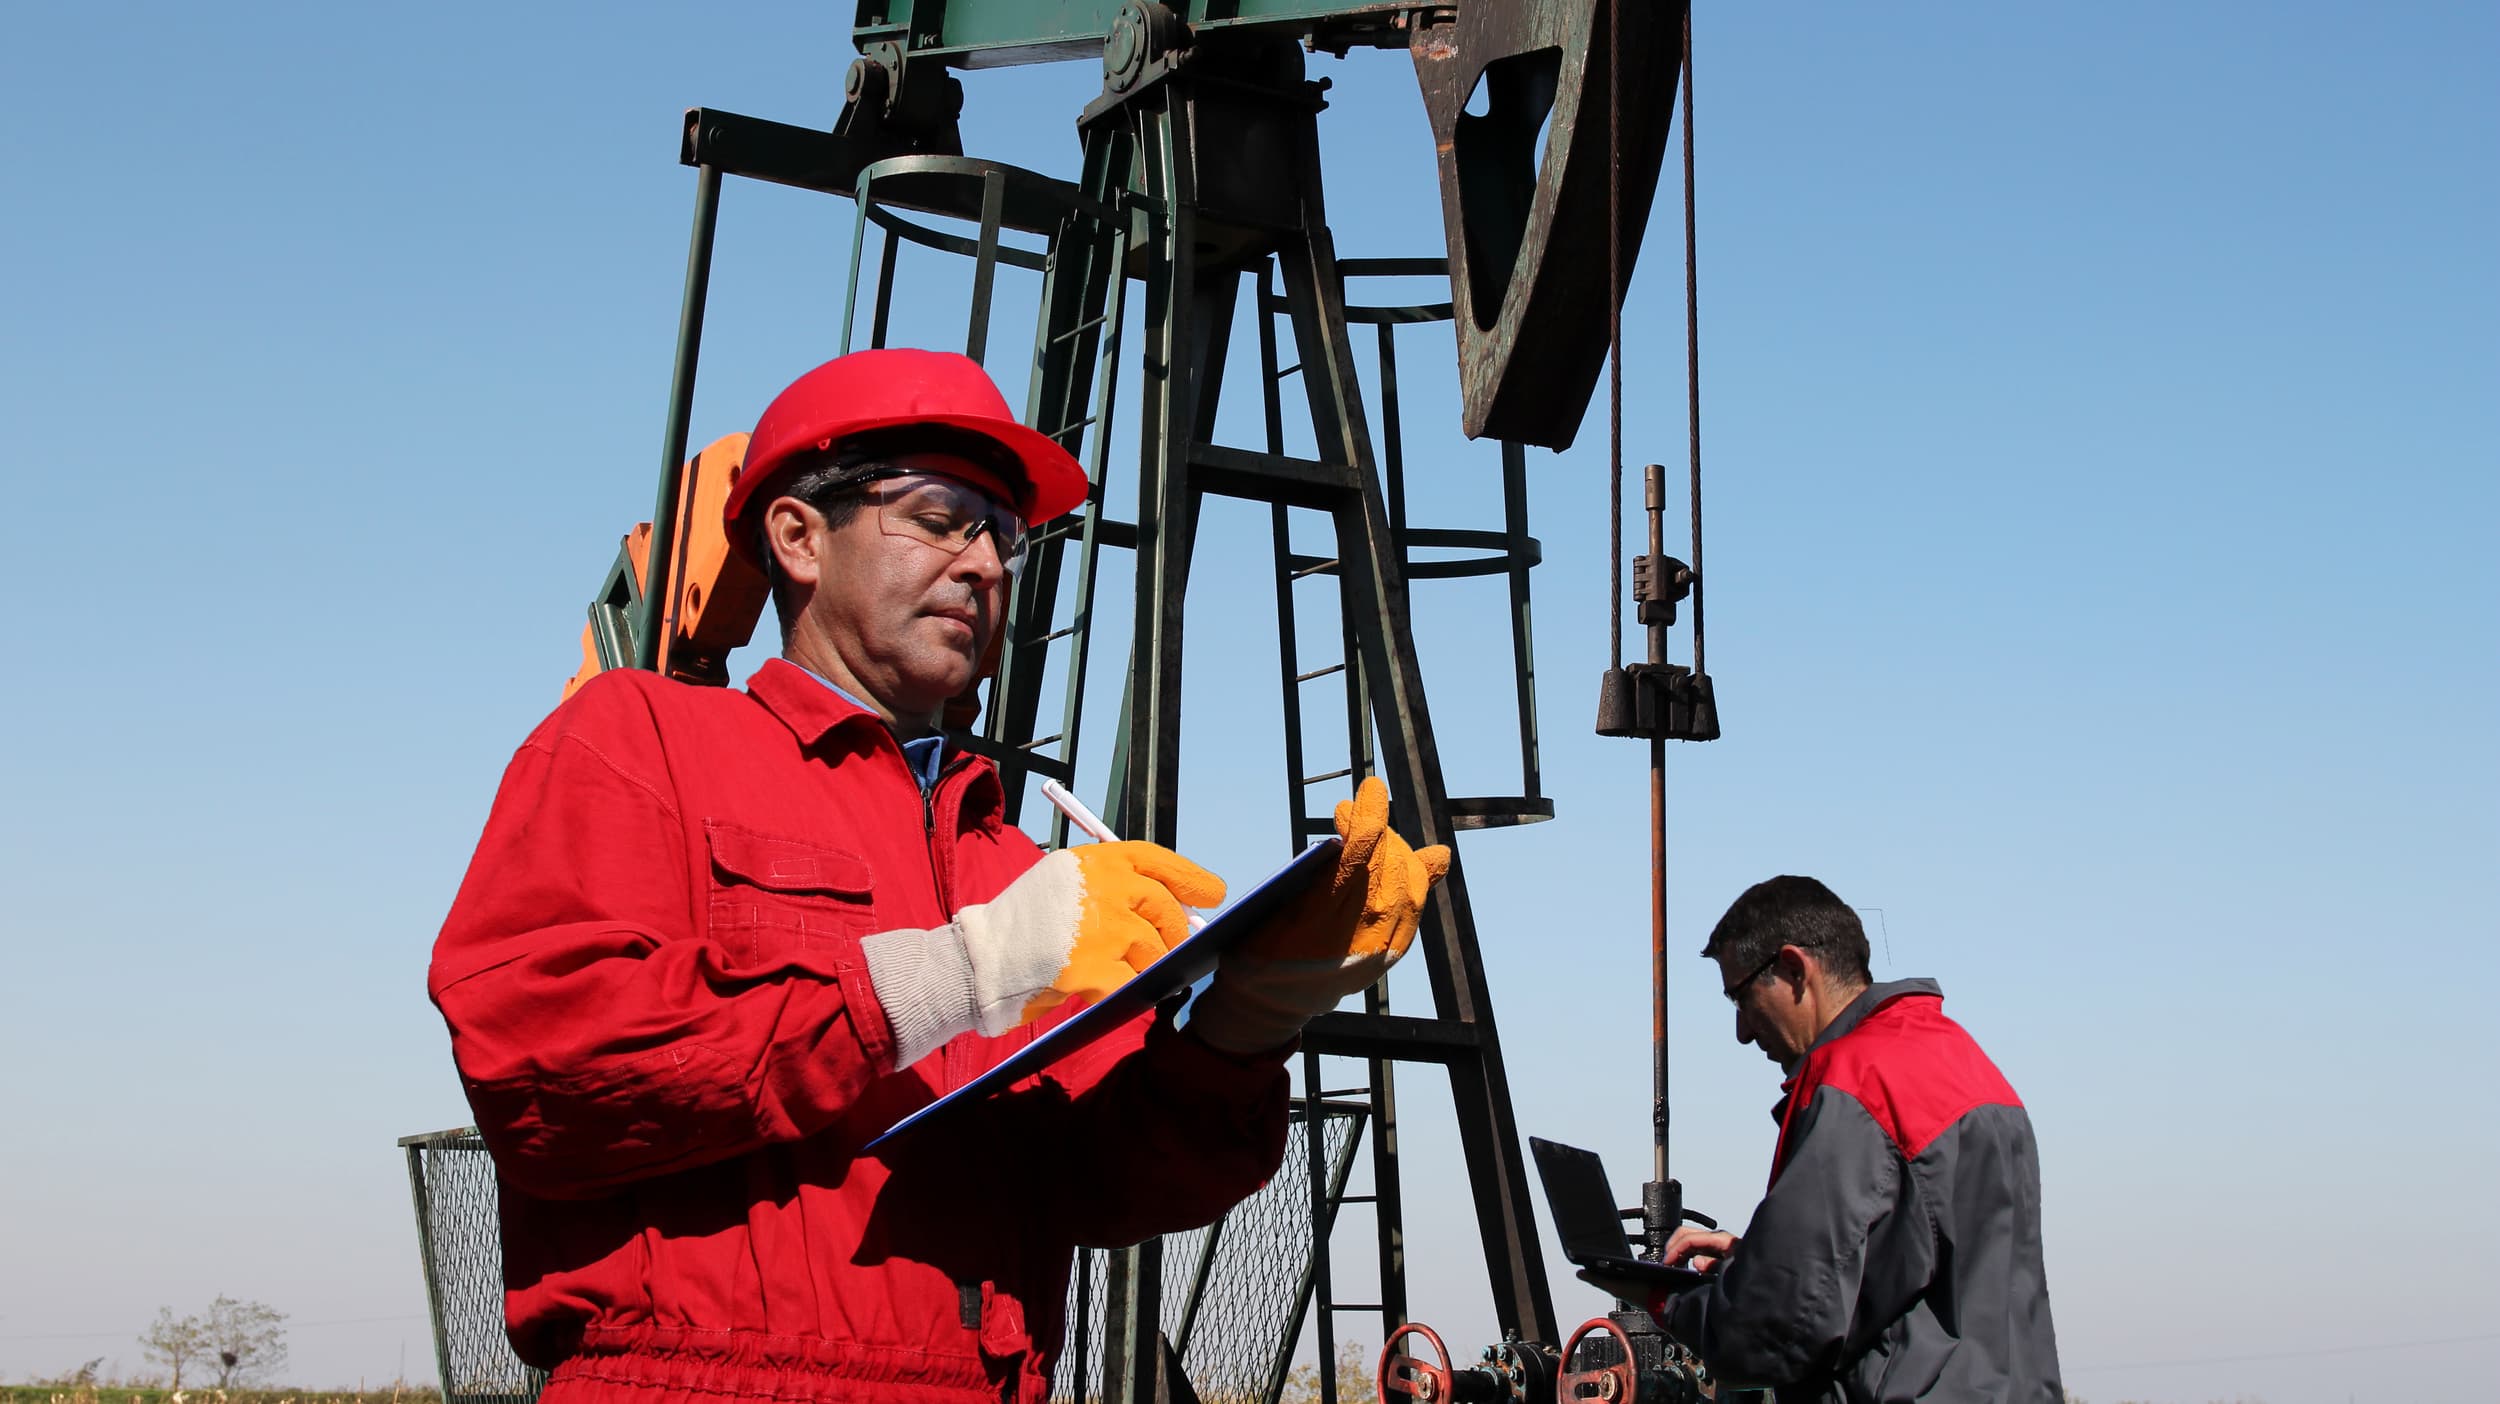 Compliance Training Online Oil & Gas Extraction Safety course